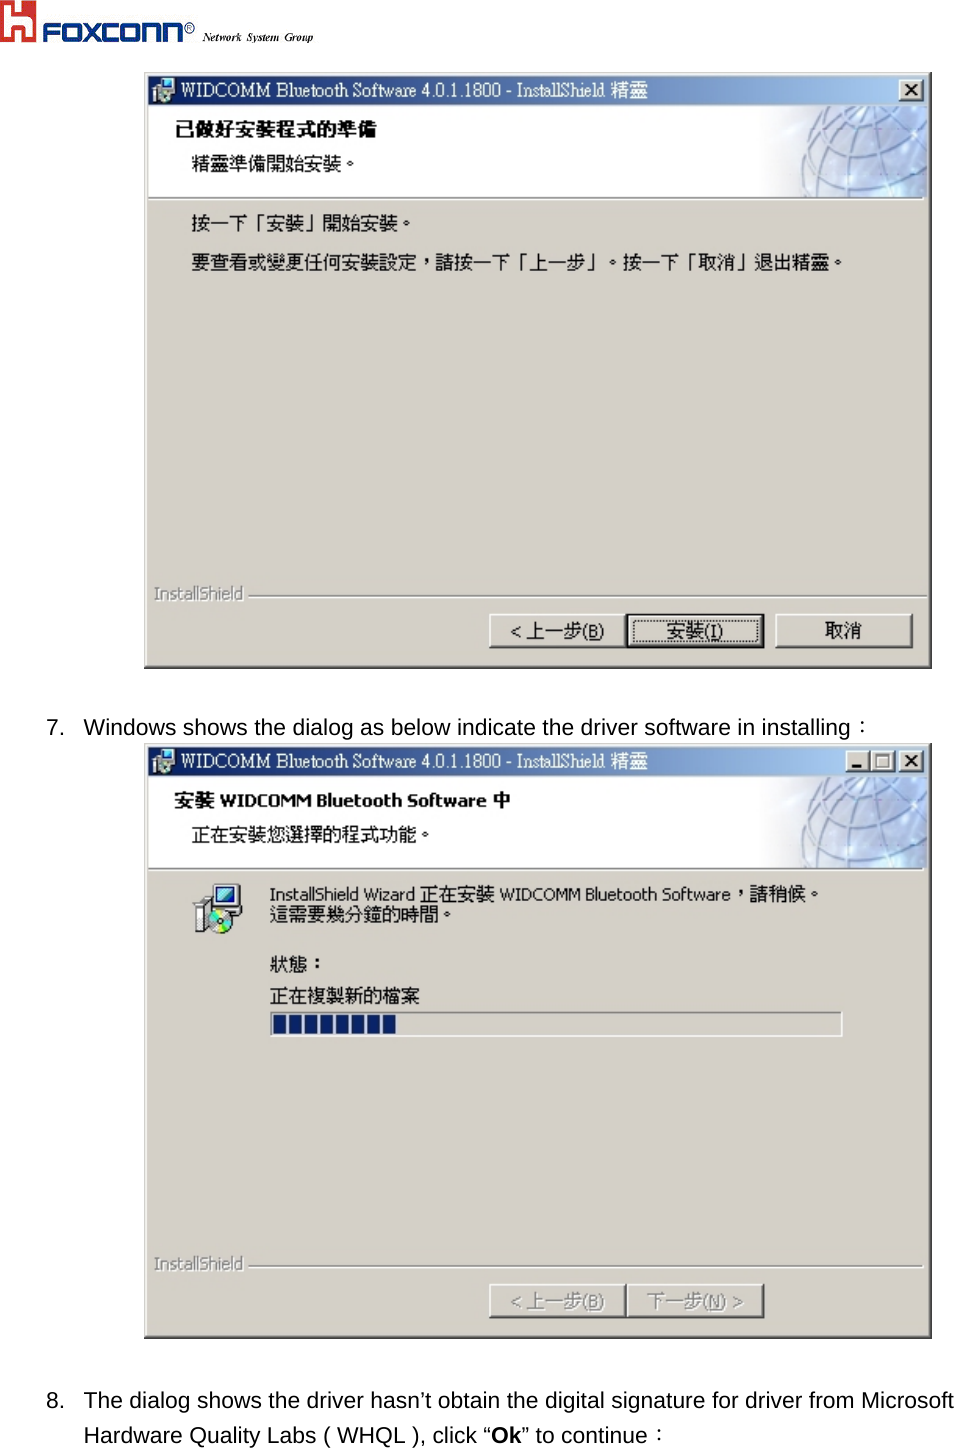    7.  Windows shows the dialog as below indicate the driver software in installing：   8.  The dialog shows the driver hasn’t obtain the digital signature for driver from Microsoft Hardware Quality Labs ( WHQL ), click “Ok” to continue： 